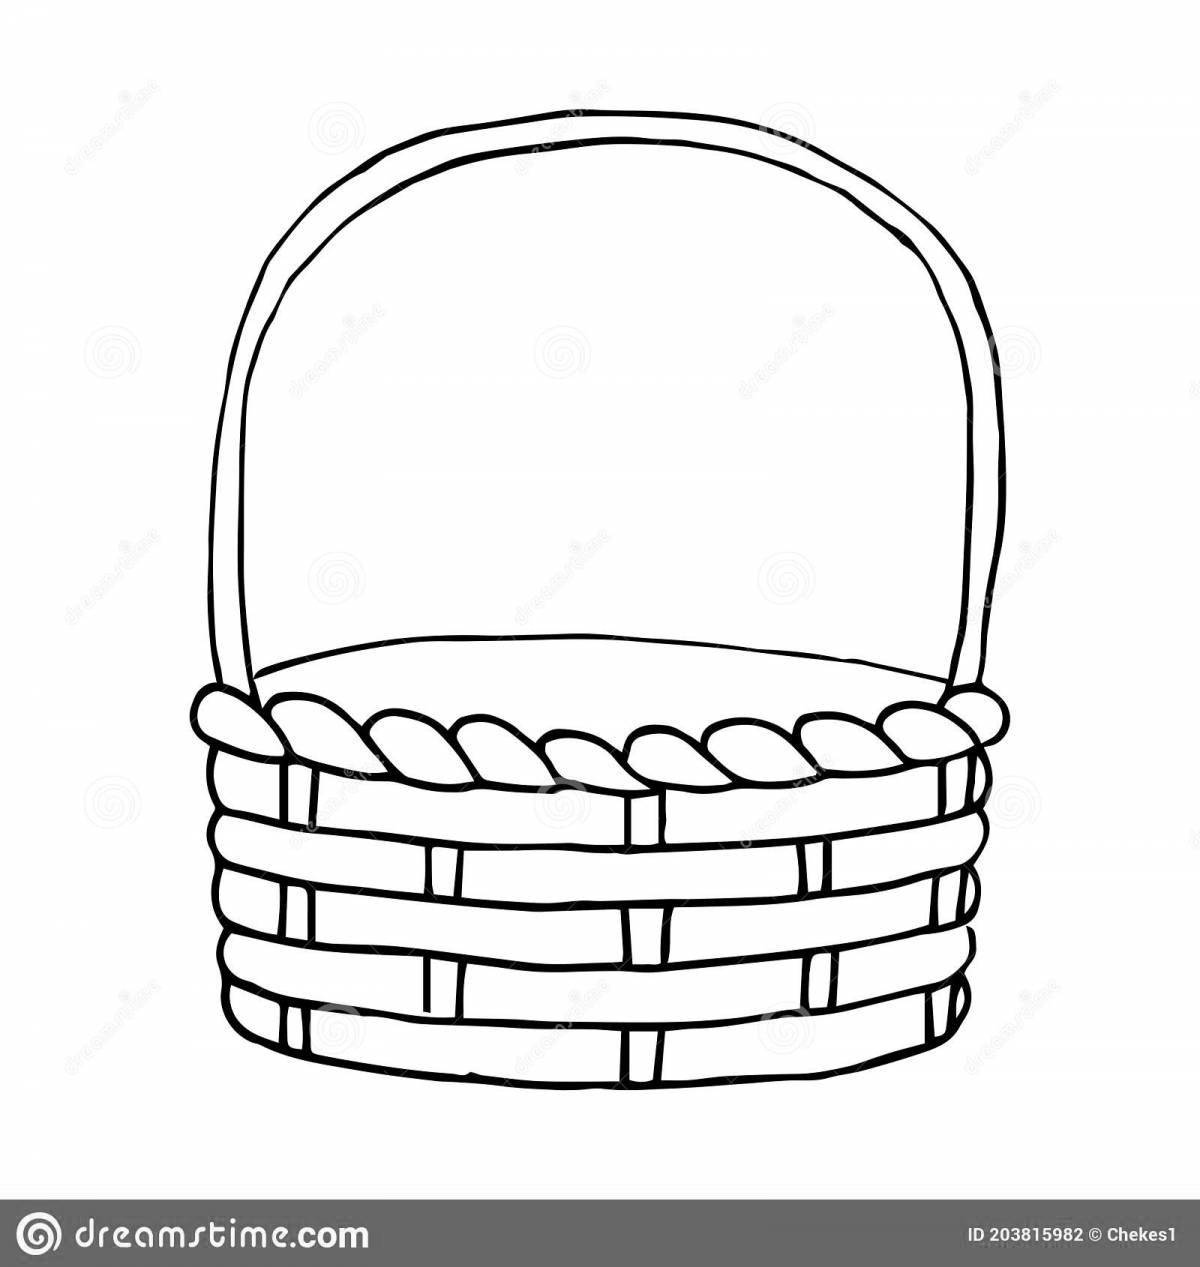 Coloring page delightful basket with mushrooms